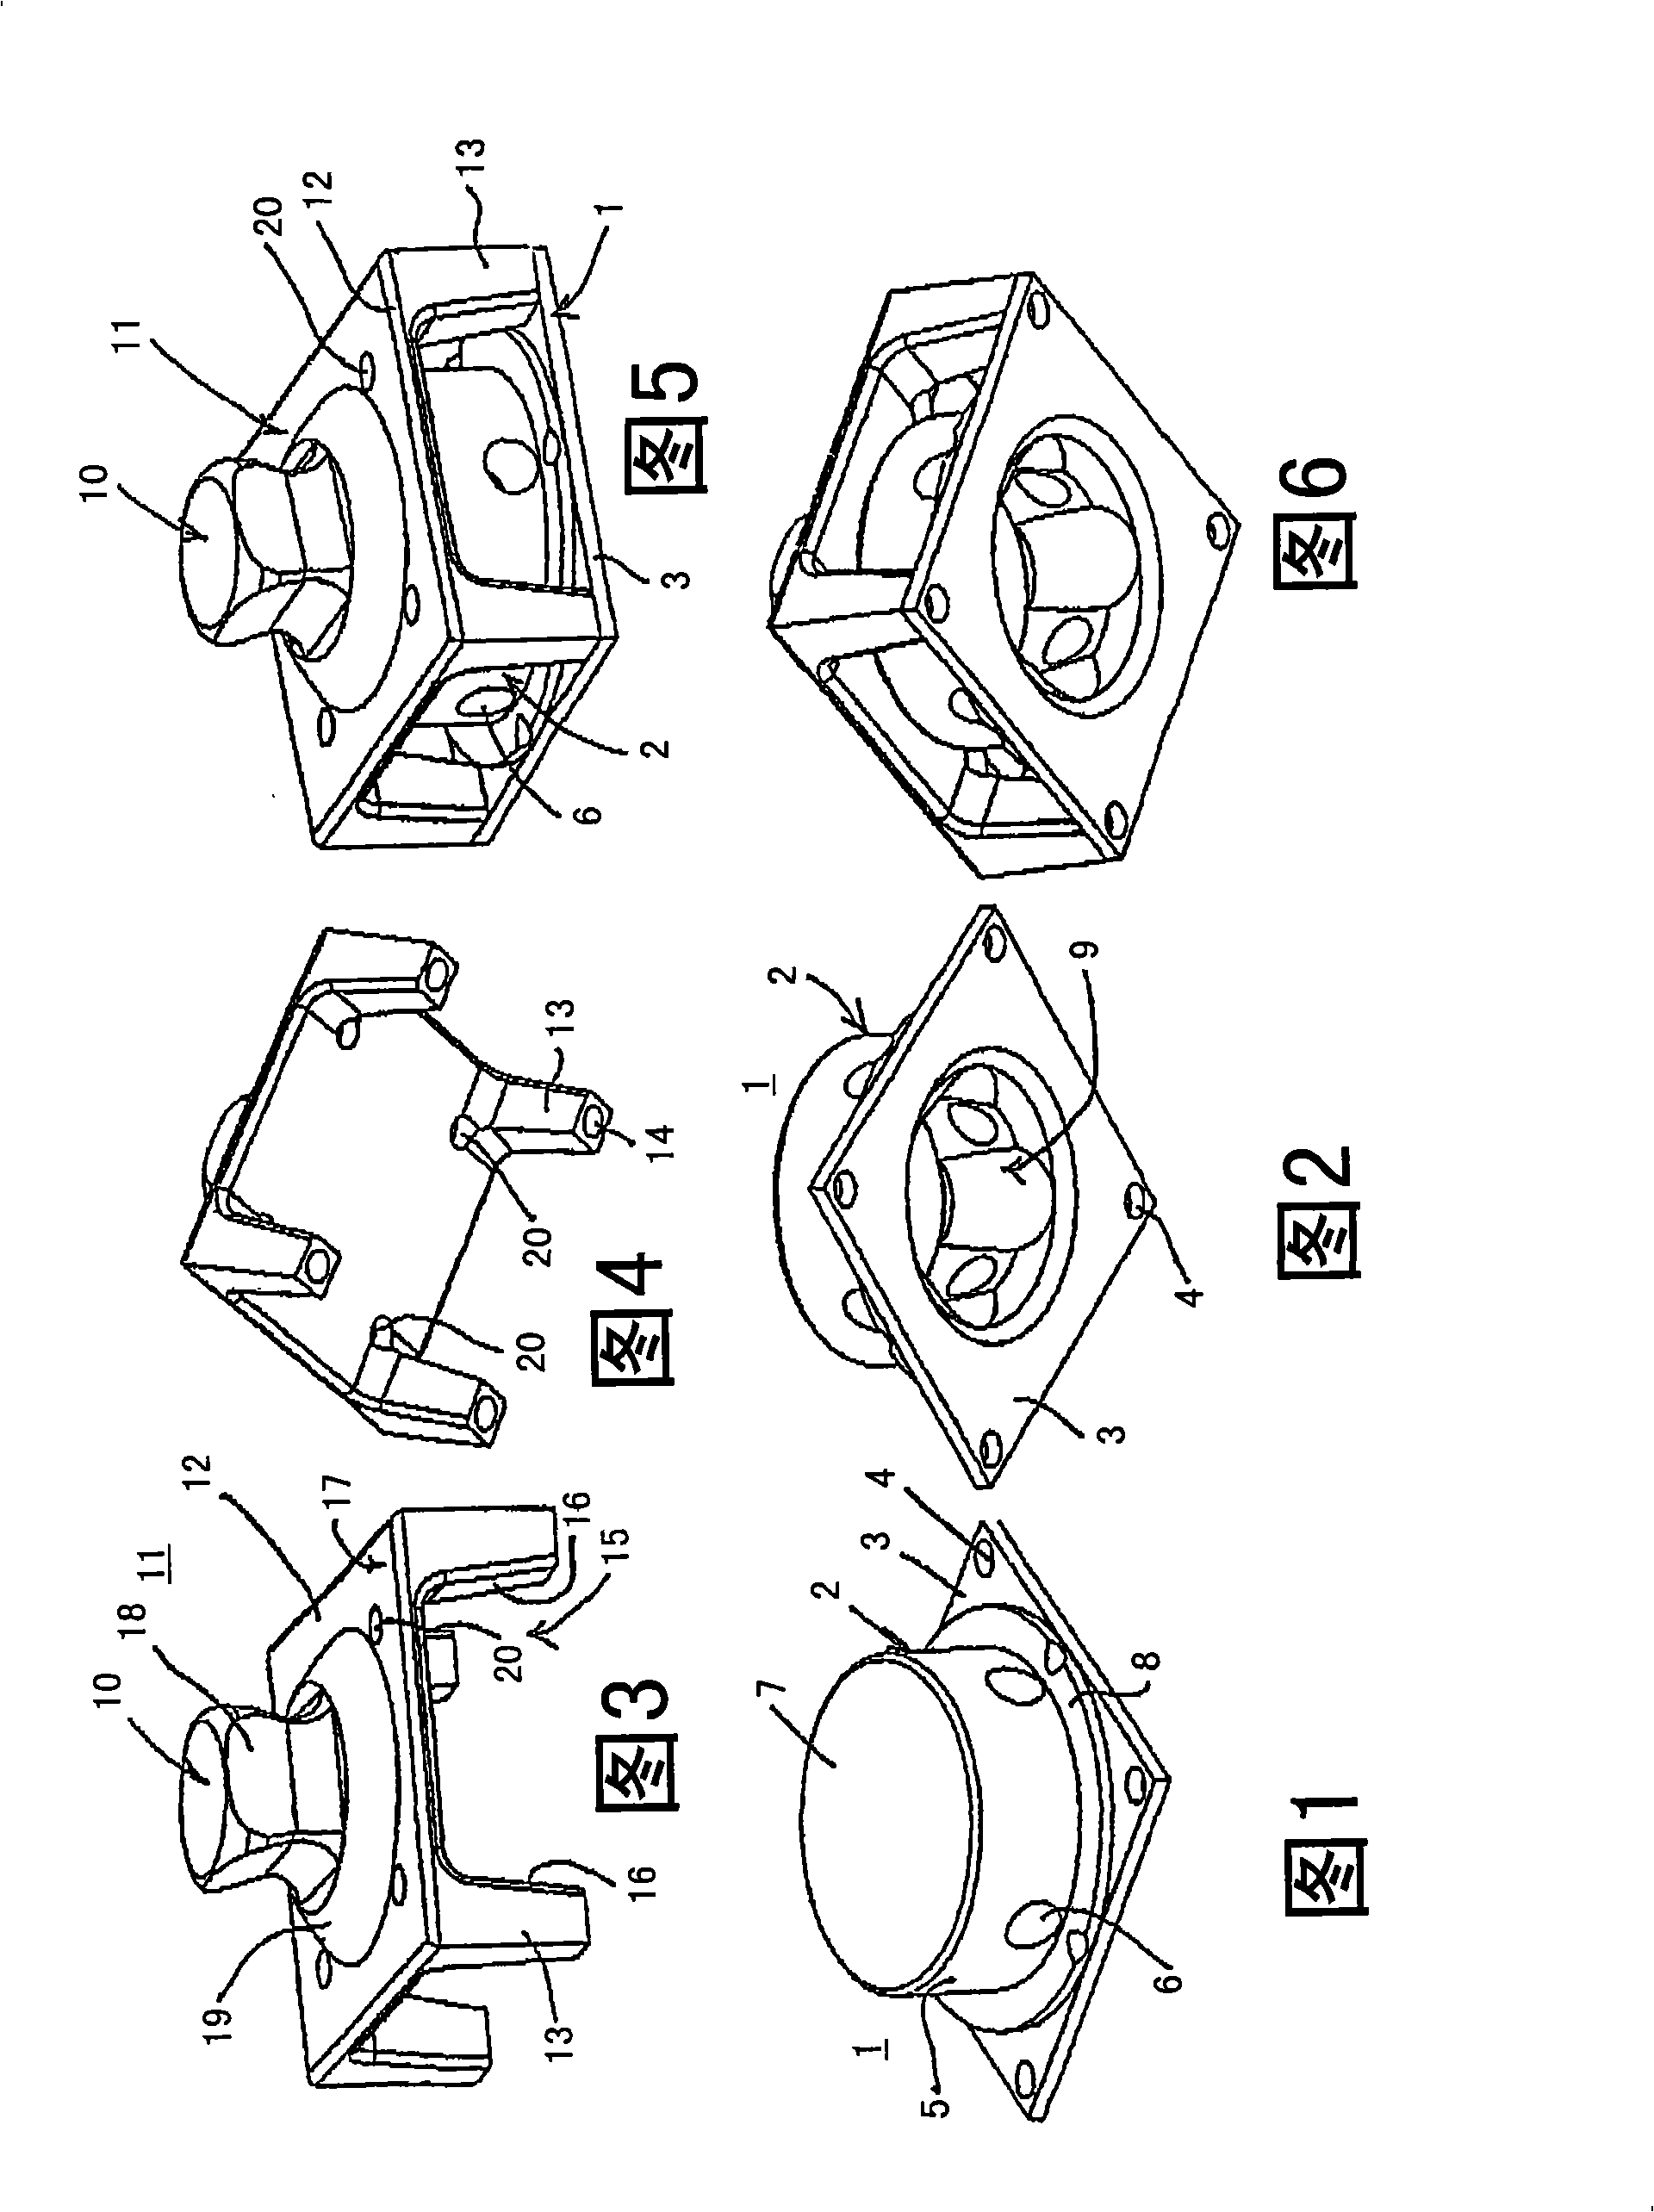 Sensor assembly for measuring forces and/or torques and use of said assembly